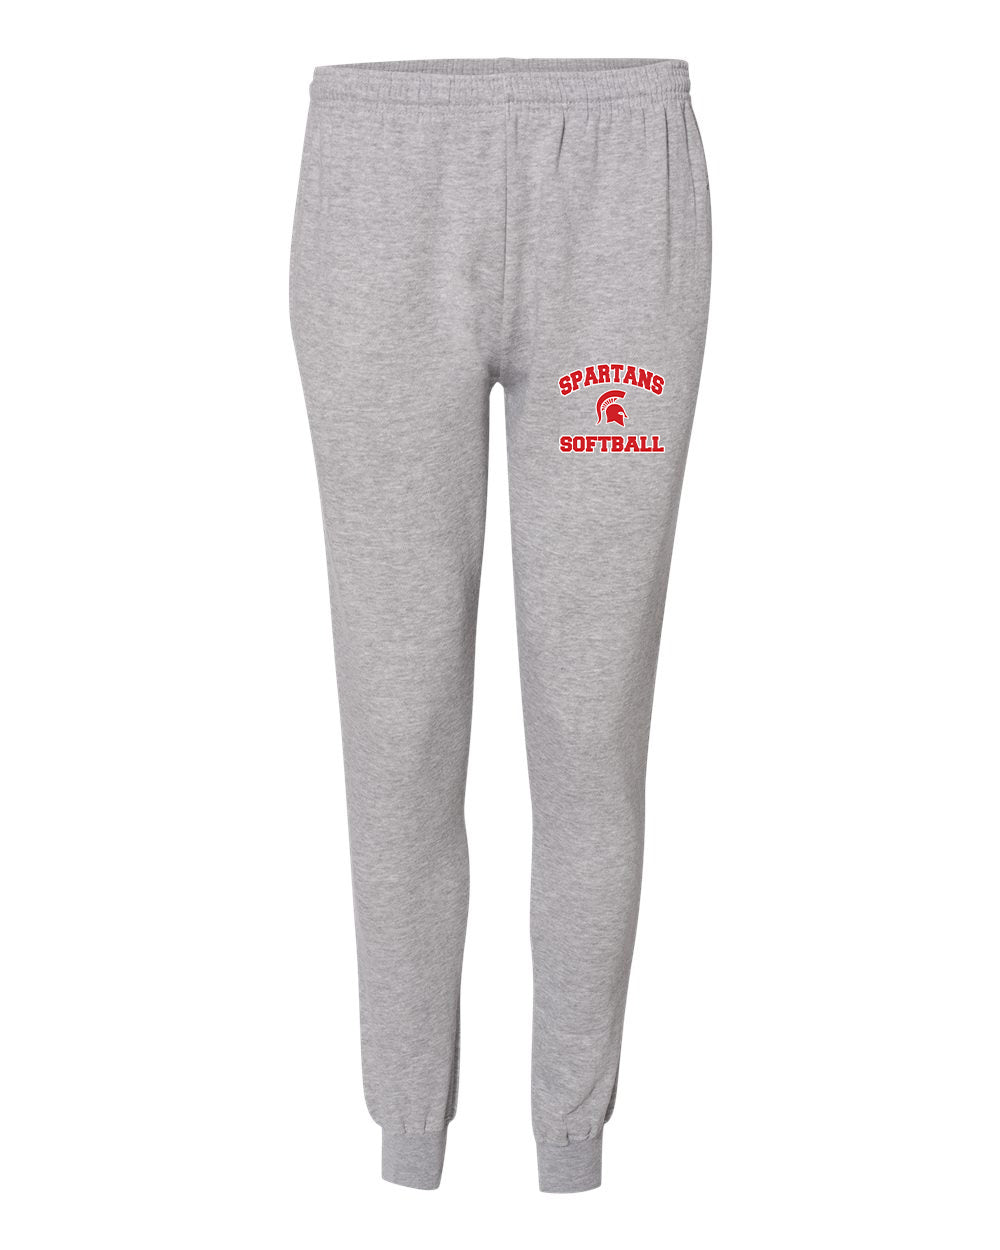 ELGS Adult Badger Fleece Jogger "Classic" - 1215 (color options available)